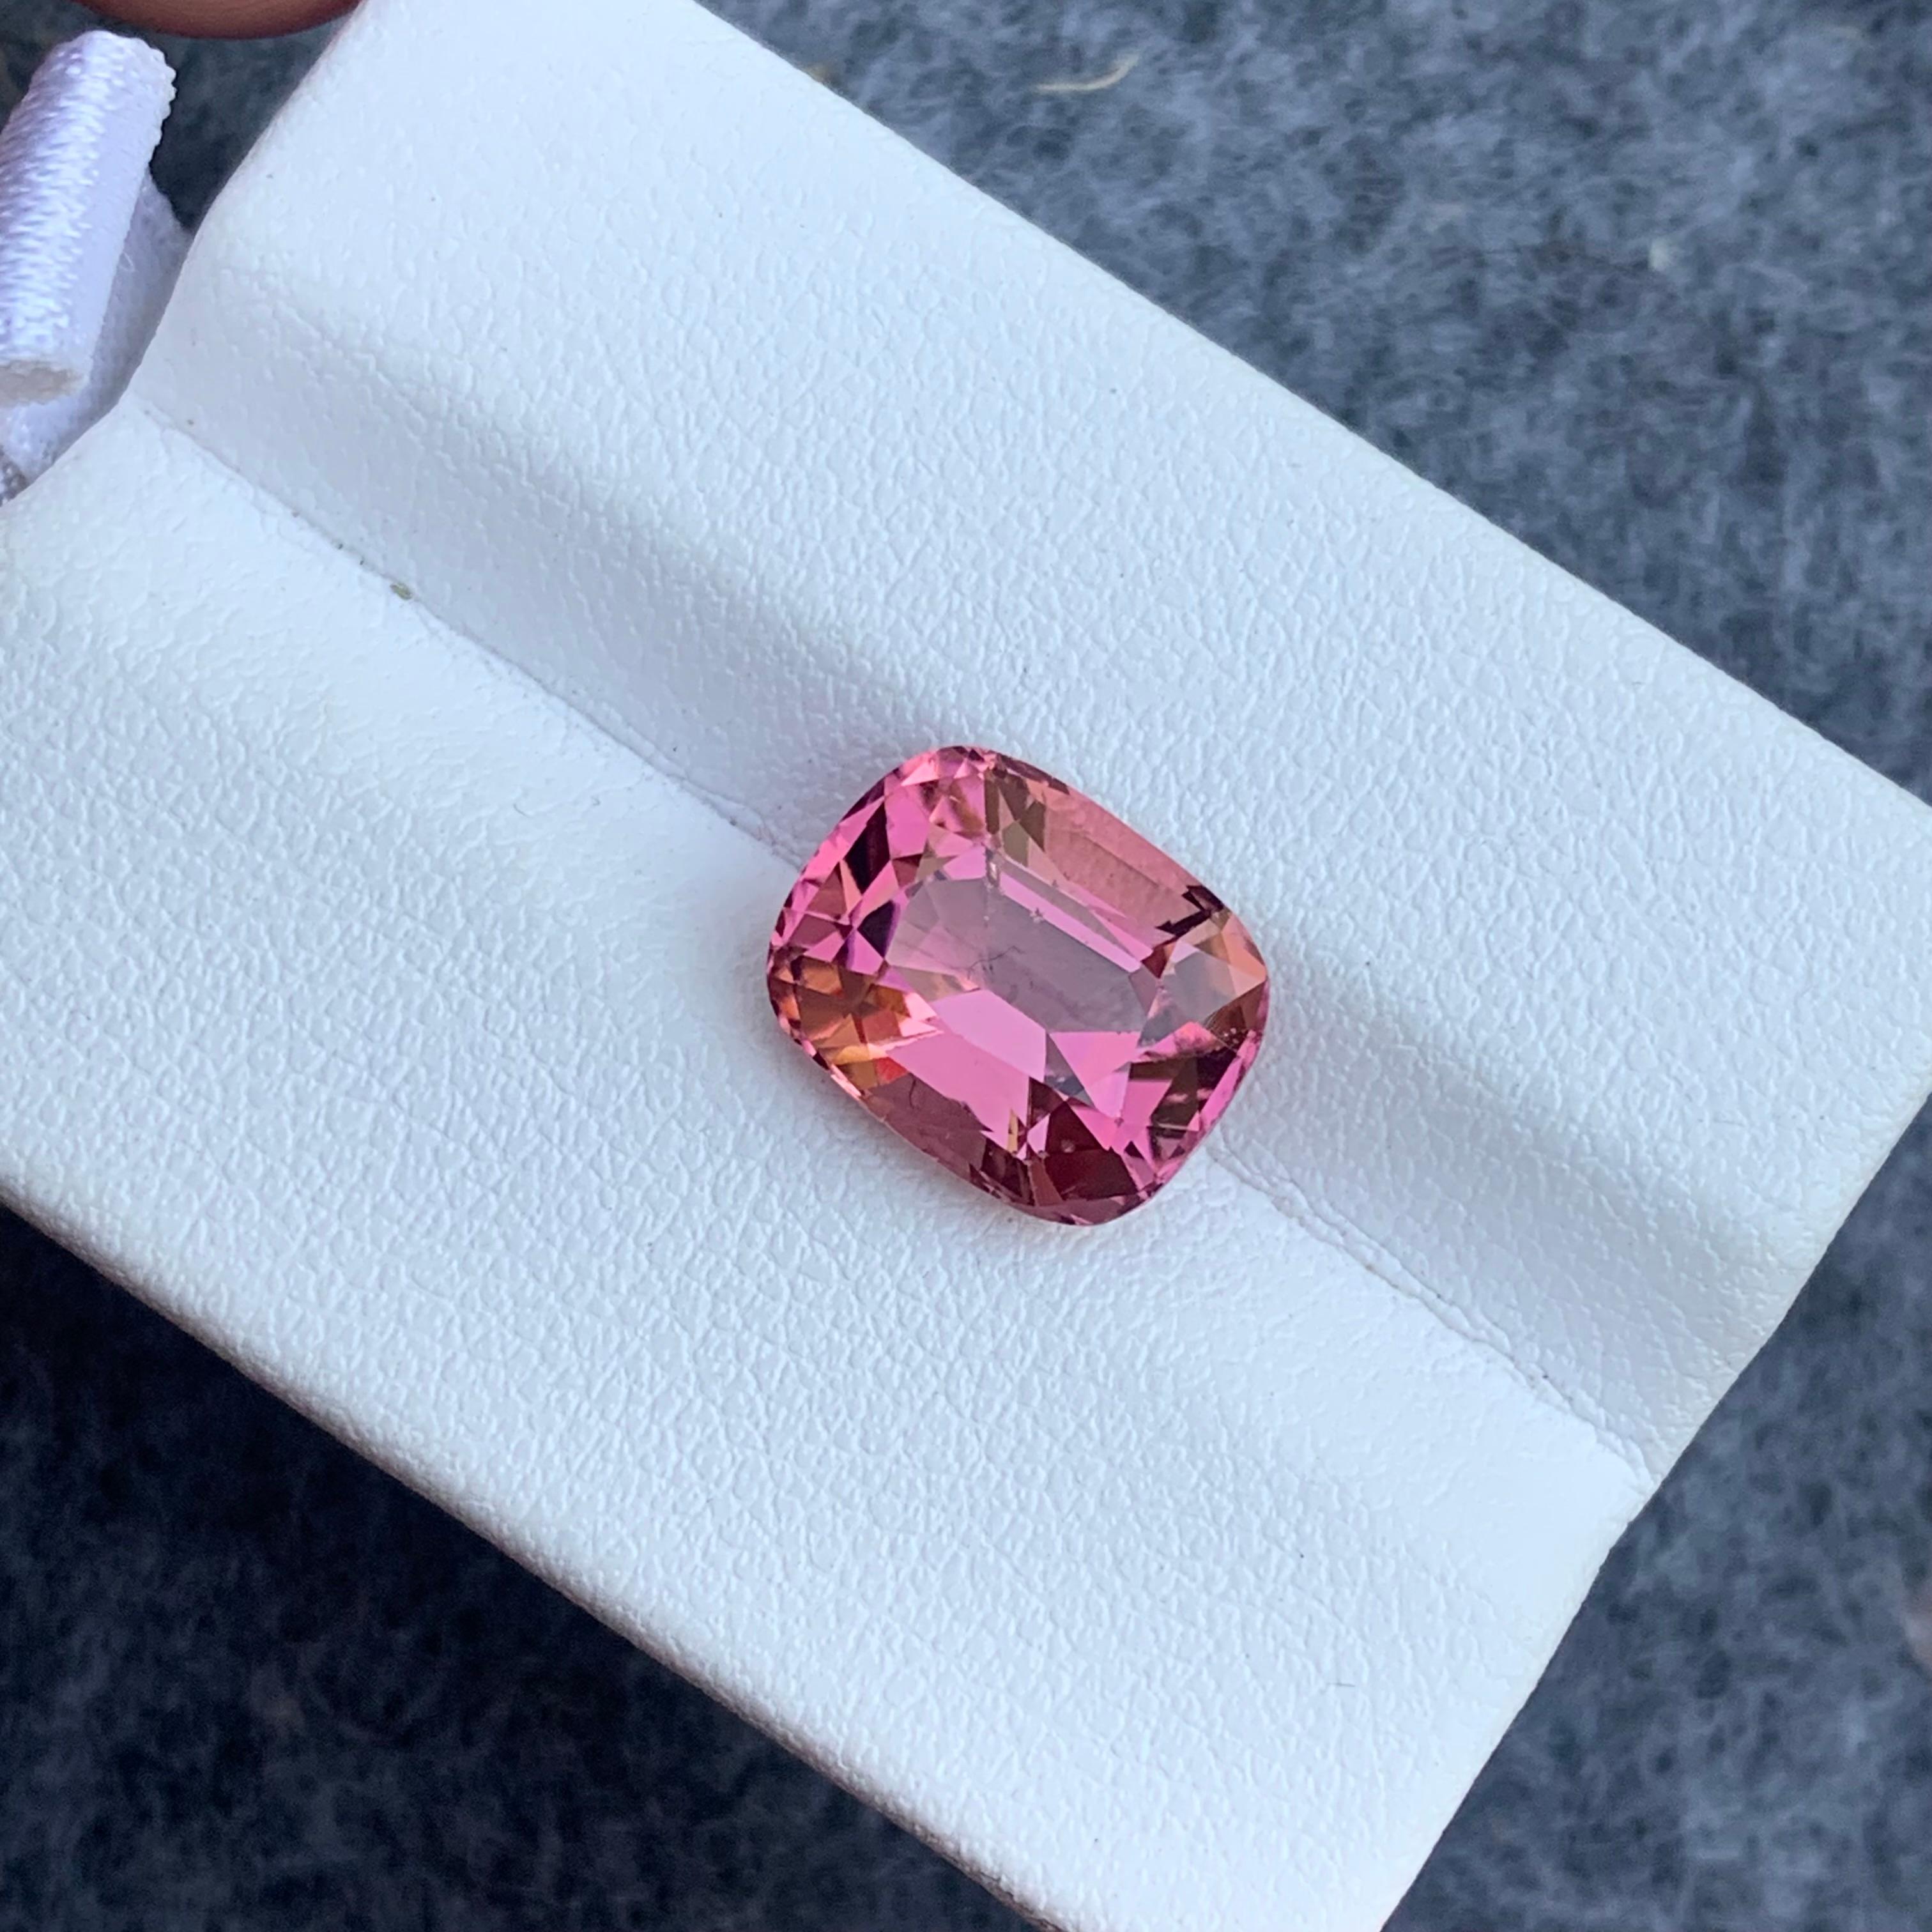 Gemstone Type : Tourmaline
Weight : 4.90 Carats
Dimensions : 11.2x9x6.9 Mm
Origin : Kunar Afghanistan
Clarity : Eye Clean
Shape: Cushion
Color: Pink
Certificate: On Demand
Basically, mint tourmalines are tourmalines with pastel hues of light green